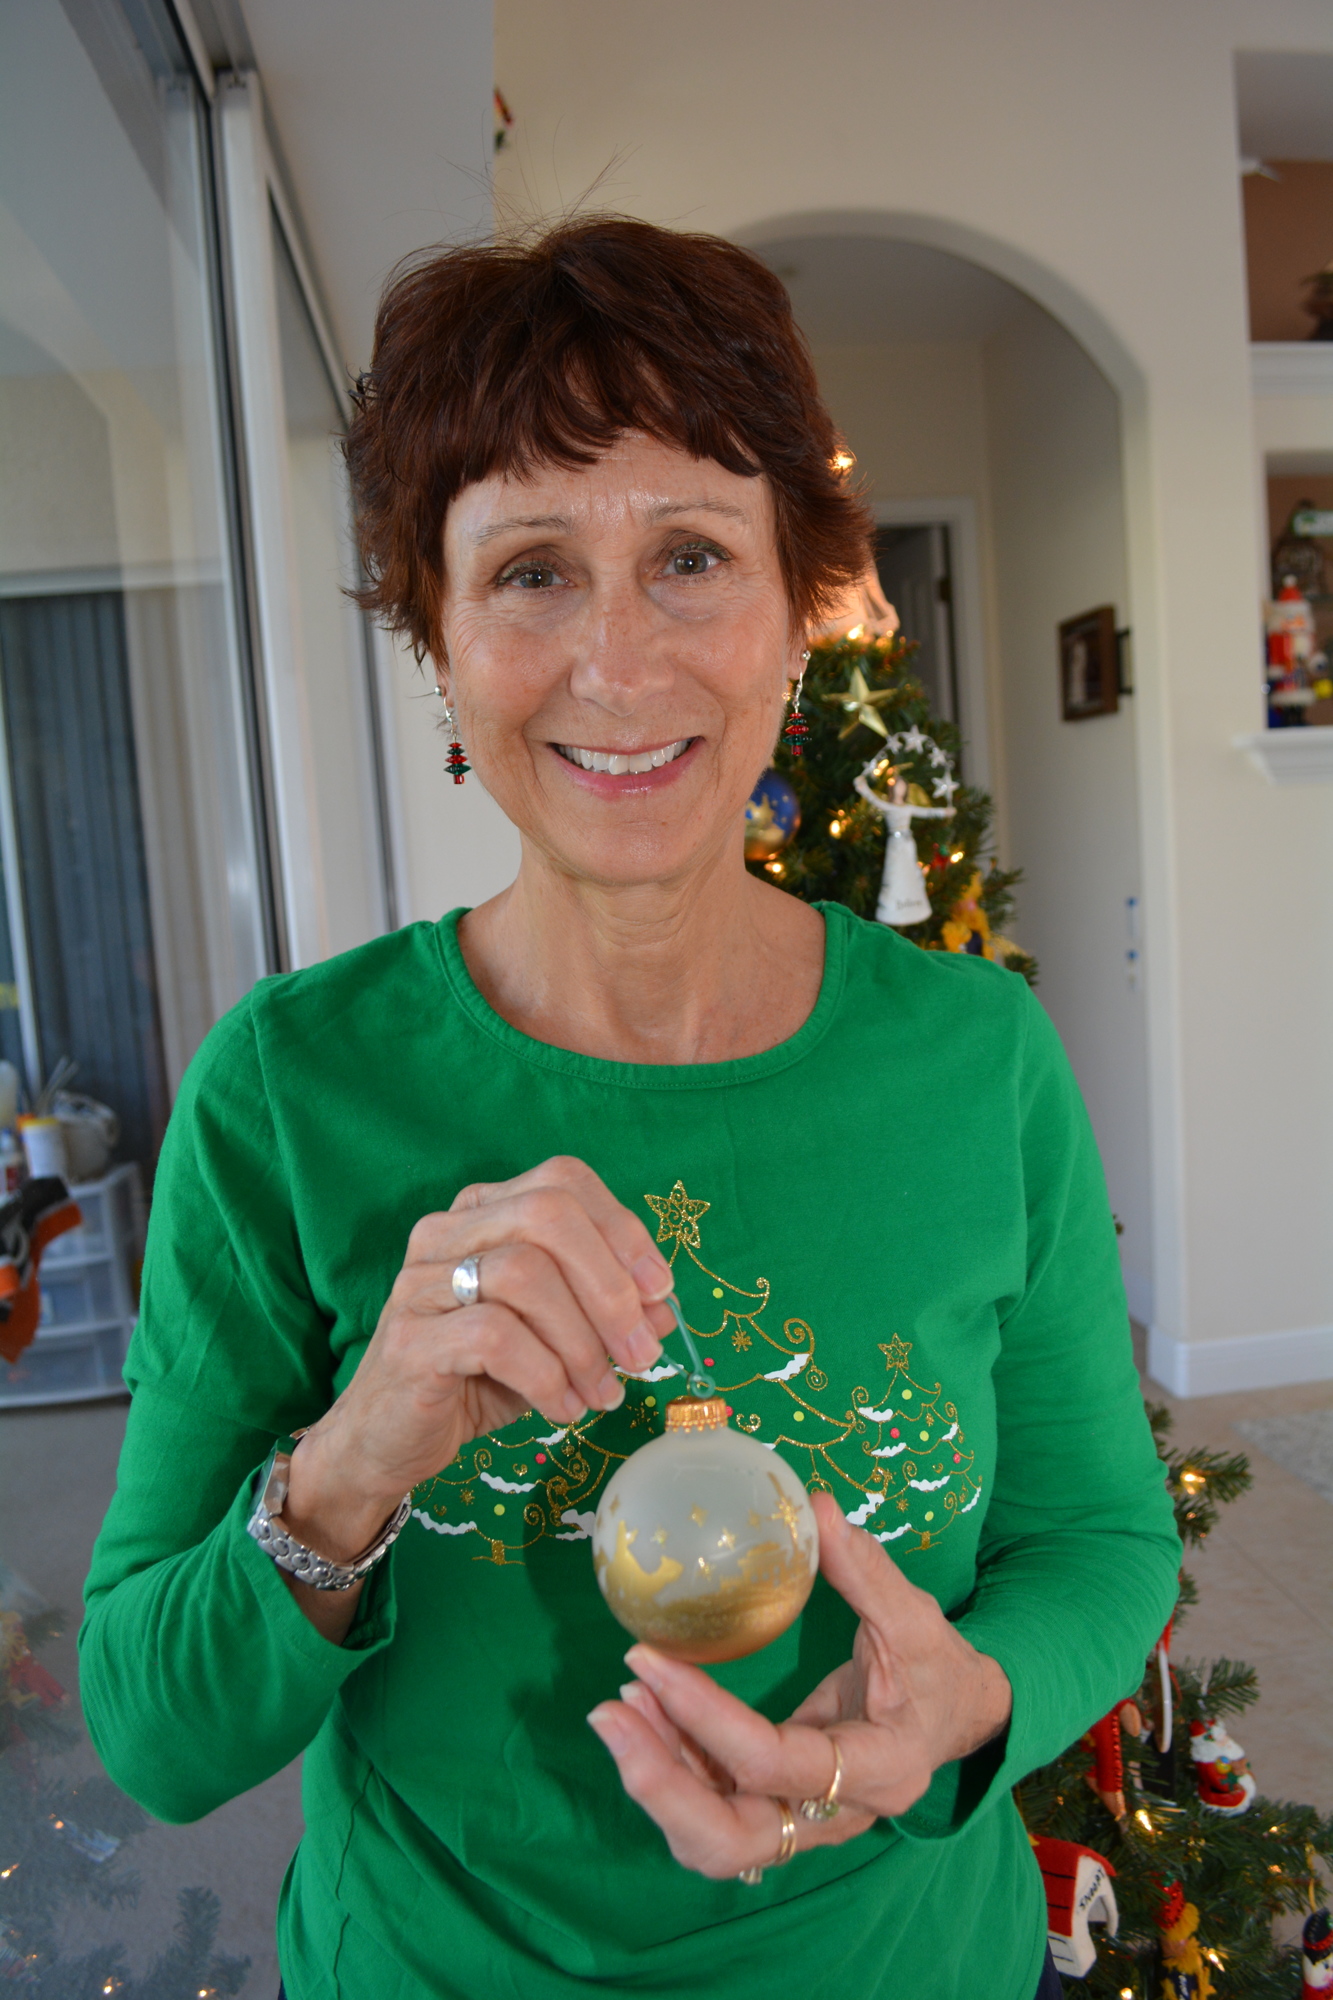 Country Club at Lakewood Ranch resident Mollie Saia has treasured this nativity ornament, given to her by a student, for 20 years.  Photo by Pam Eubanks.